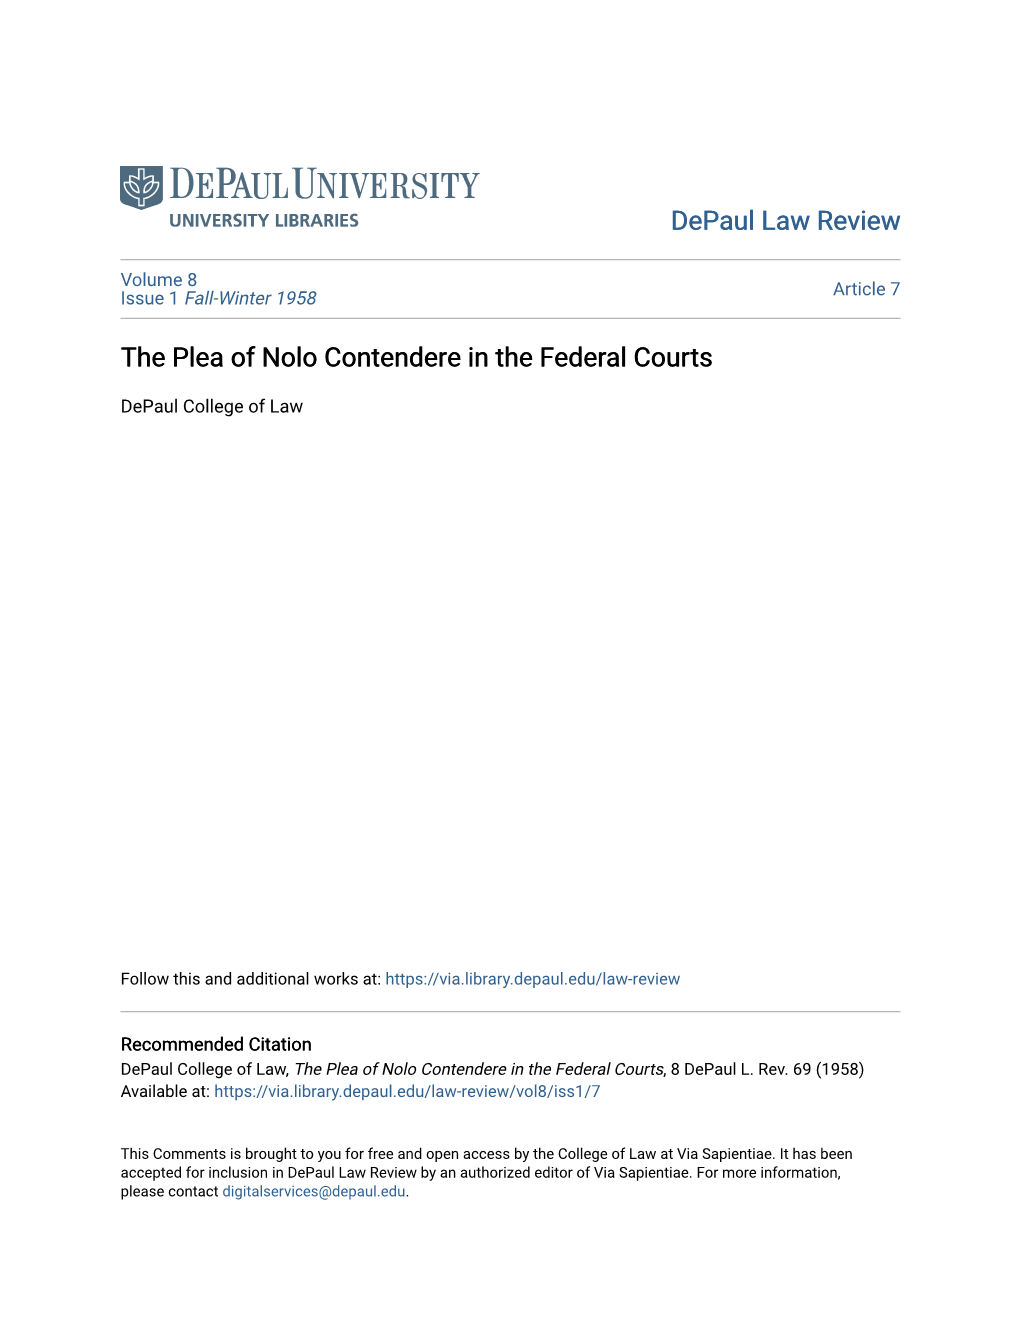 The Plea of Nolo Contendere in the Federal Courts